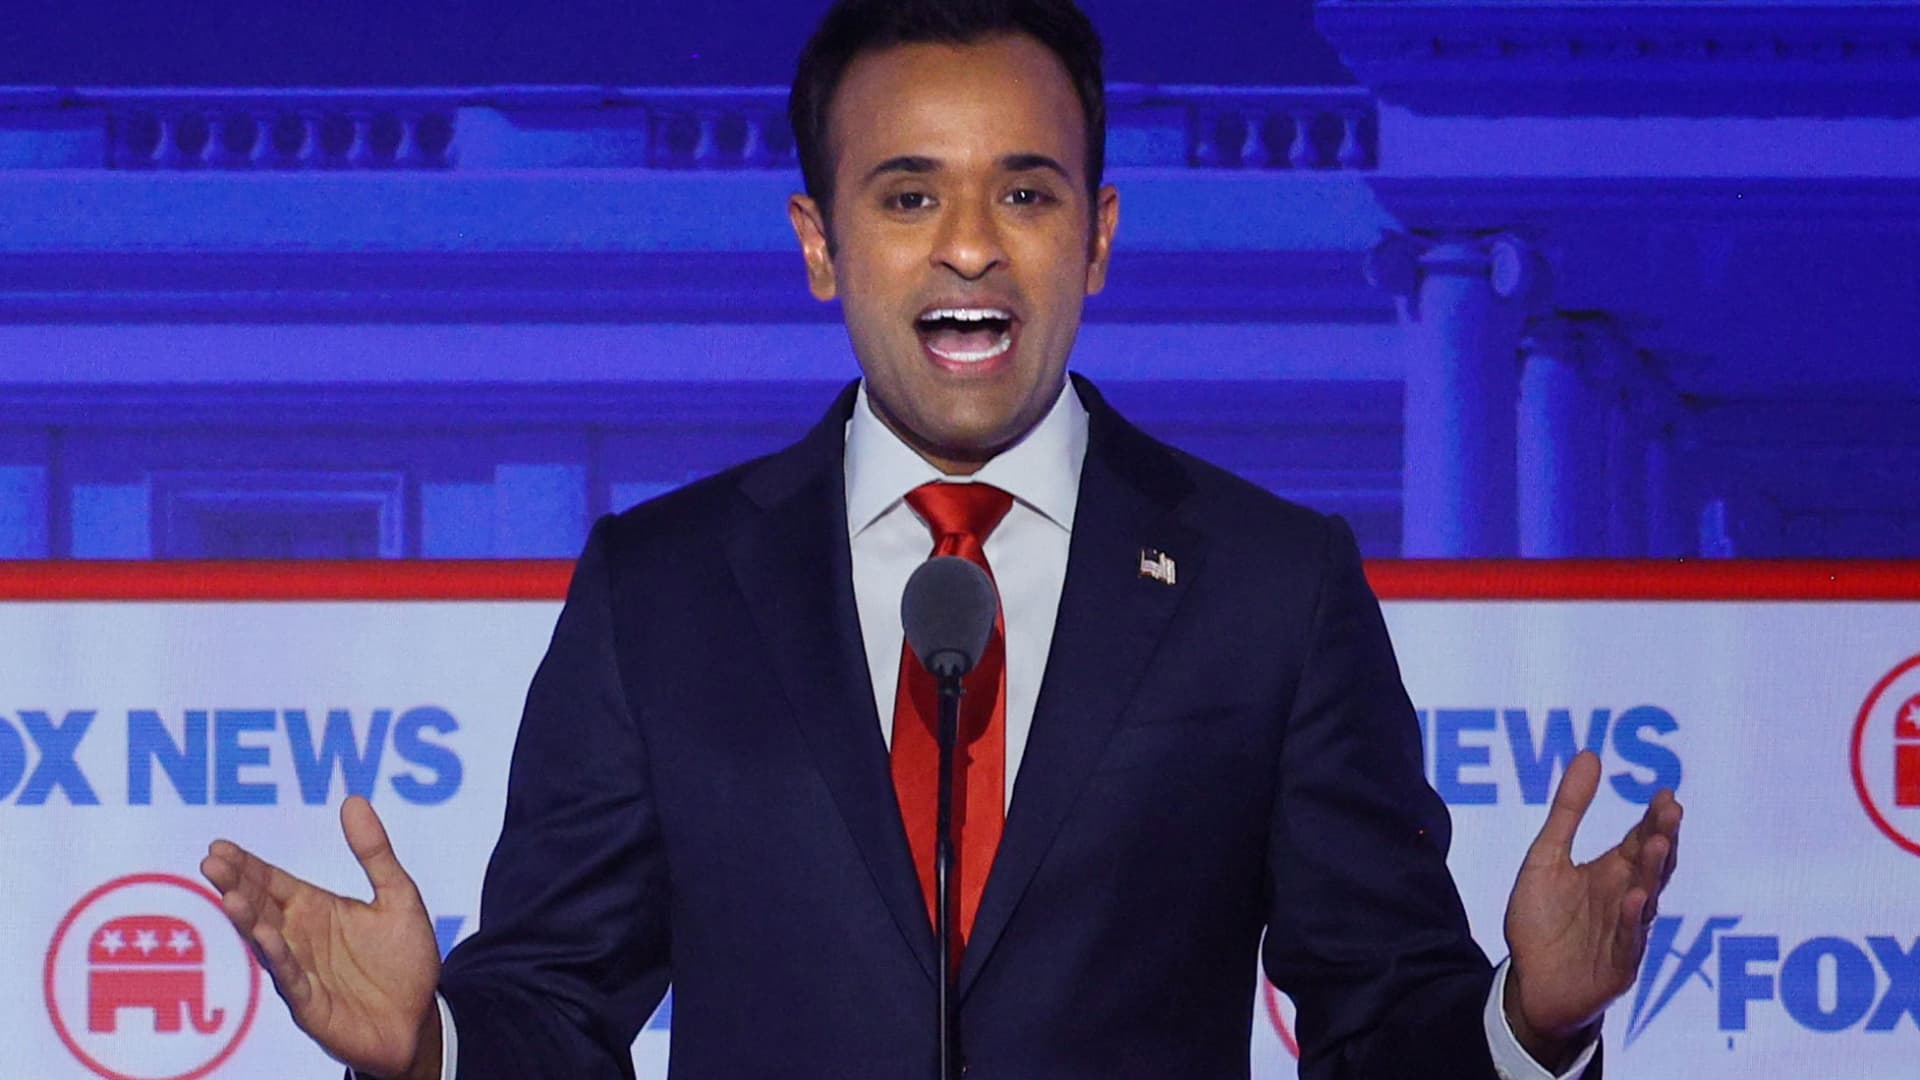 Former biotech executive Vivek Ramaswamy speaks at the first Republican candidates' debate of the 2024 U.S. presidential campaign in Milwaukee, Wisconsin, August 23, 2023.